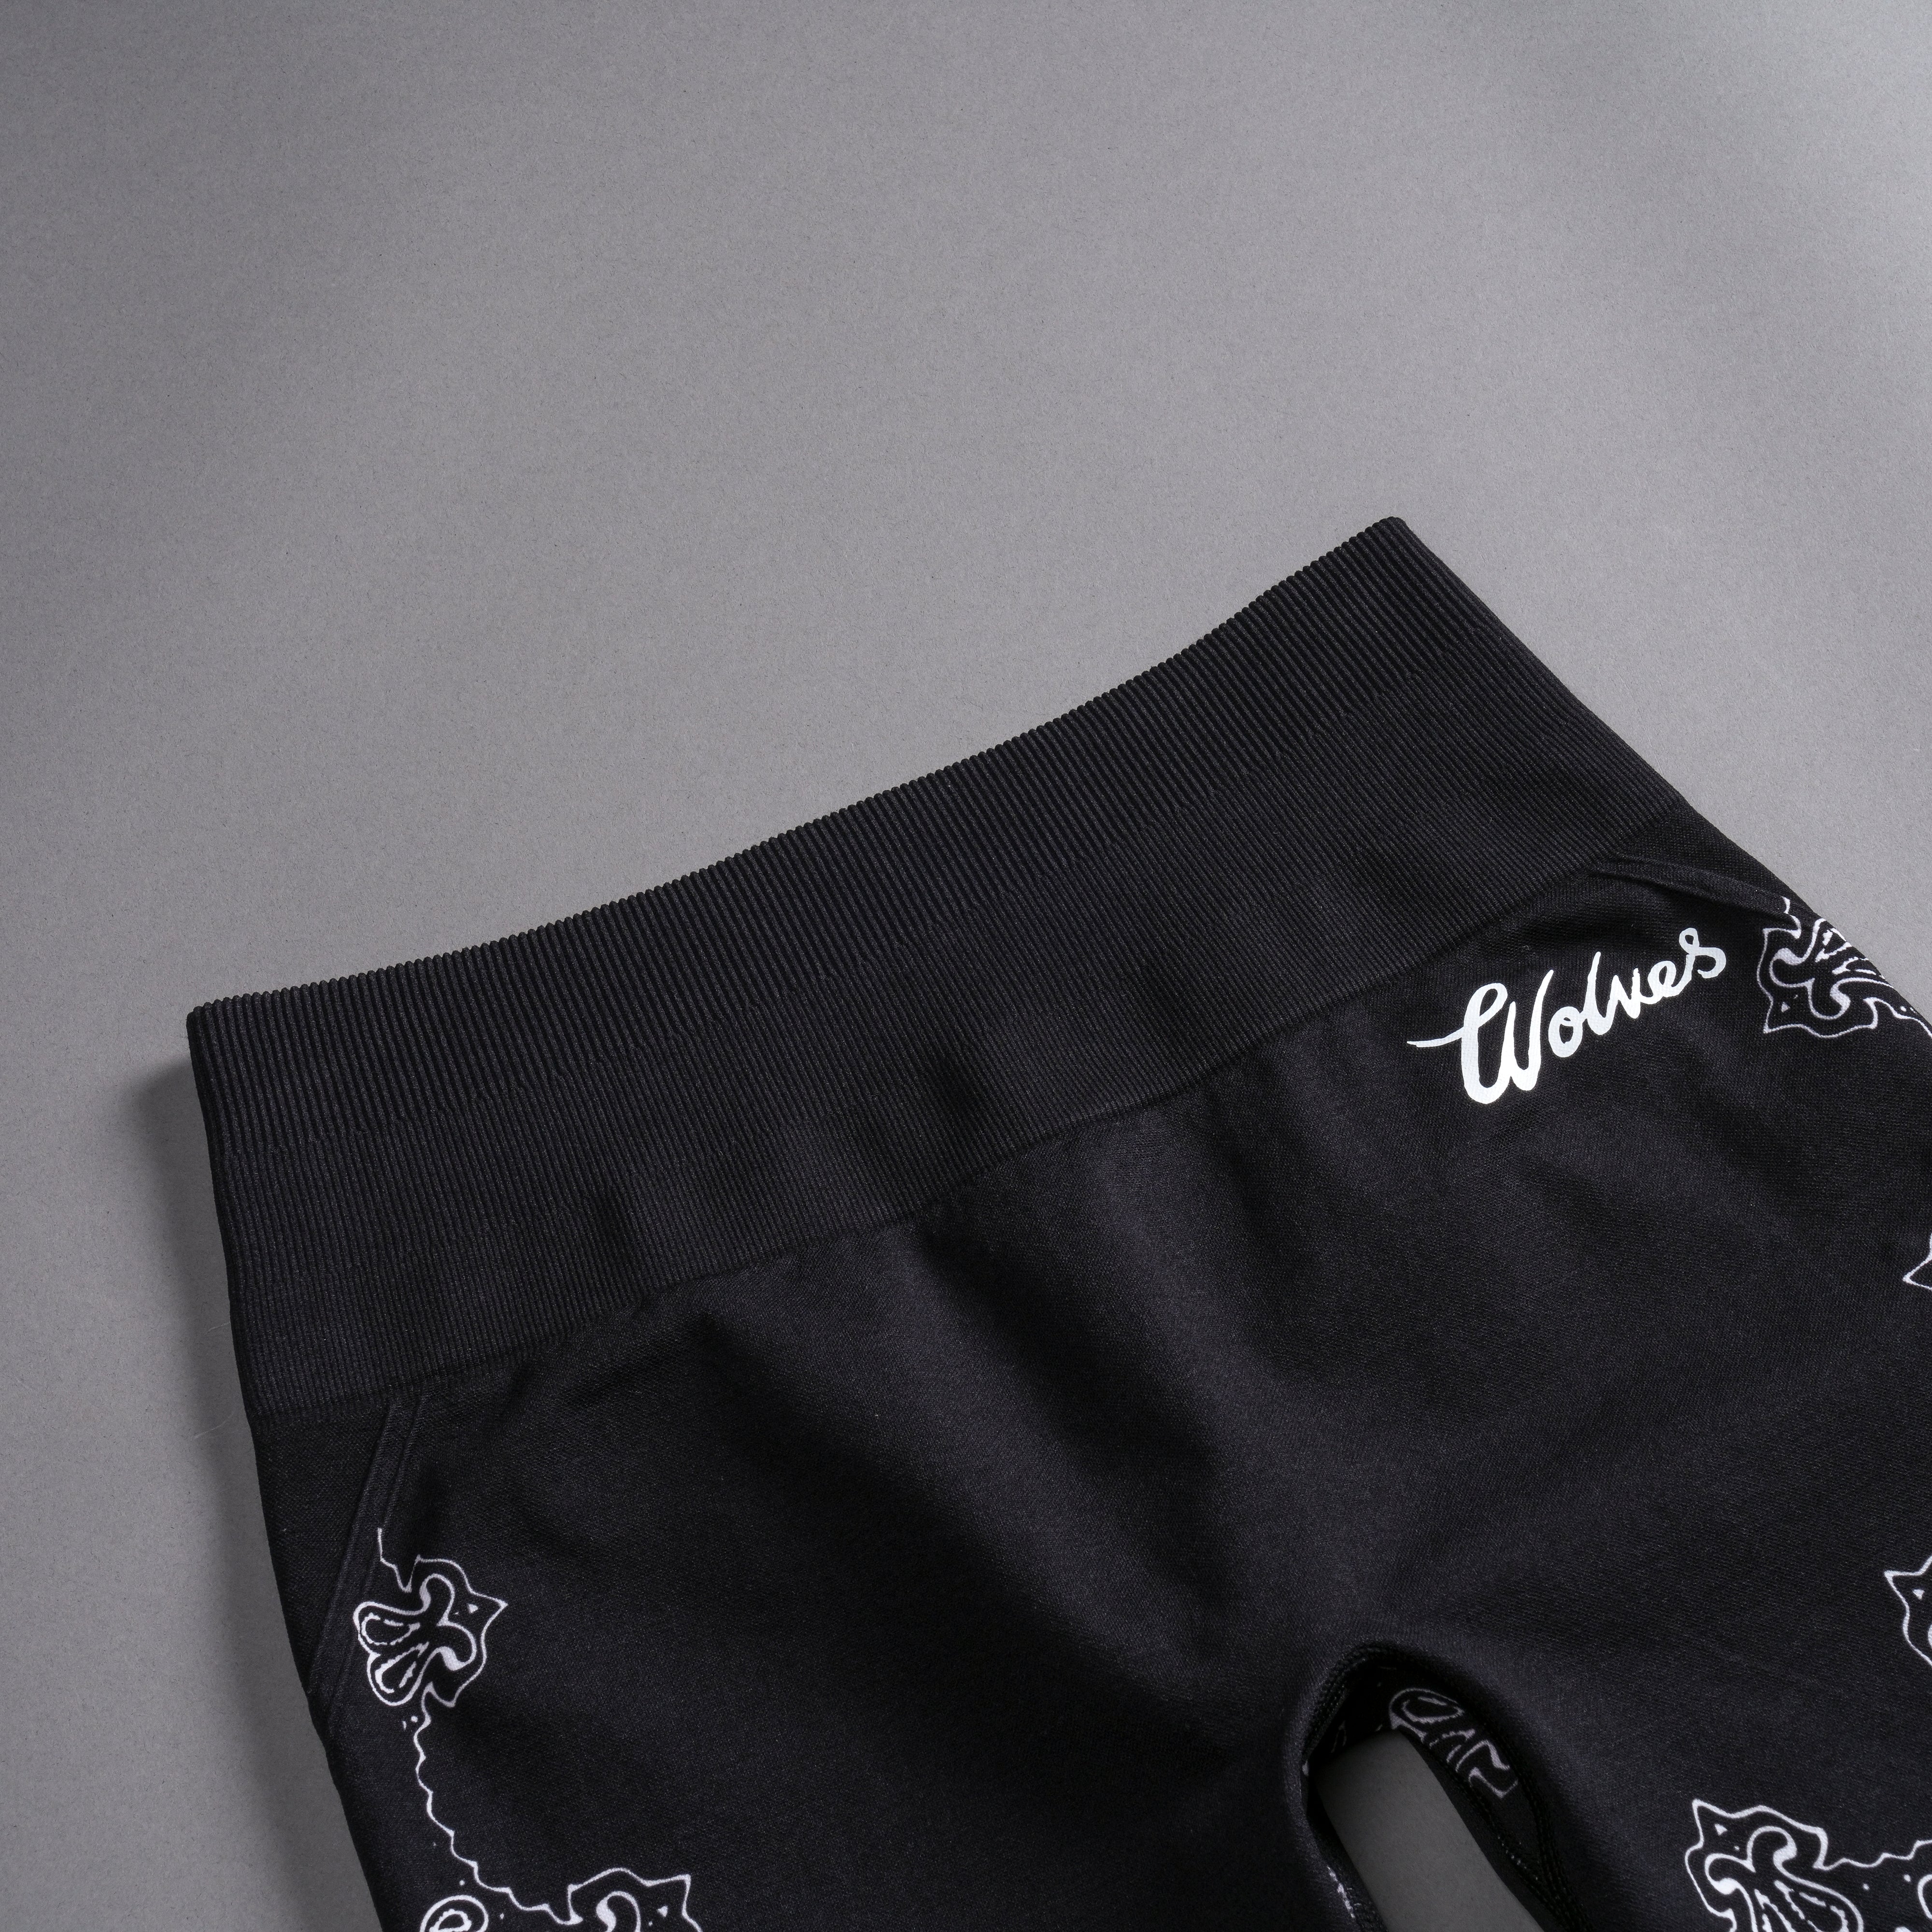 Western Wolves Everson Seamless "Huxley" Shorts in Black Darc Paisley